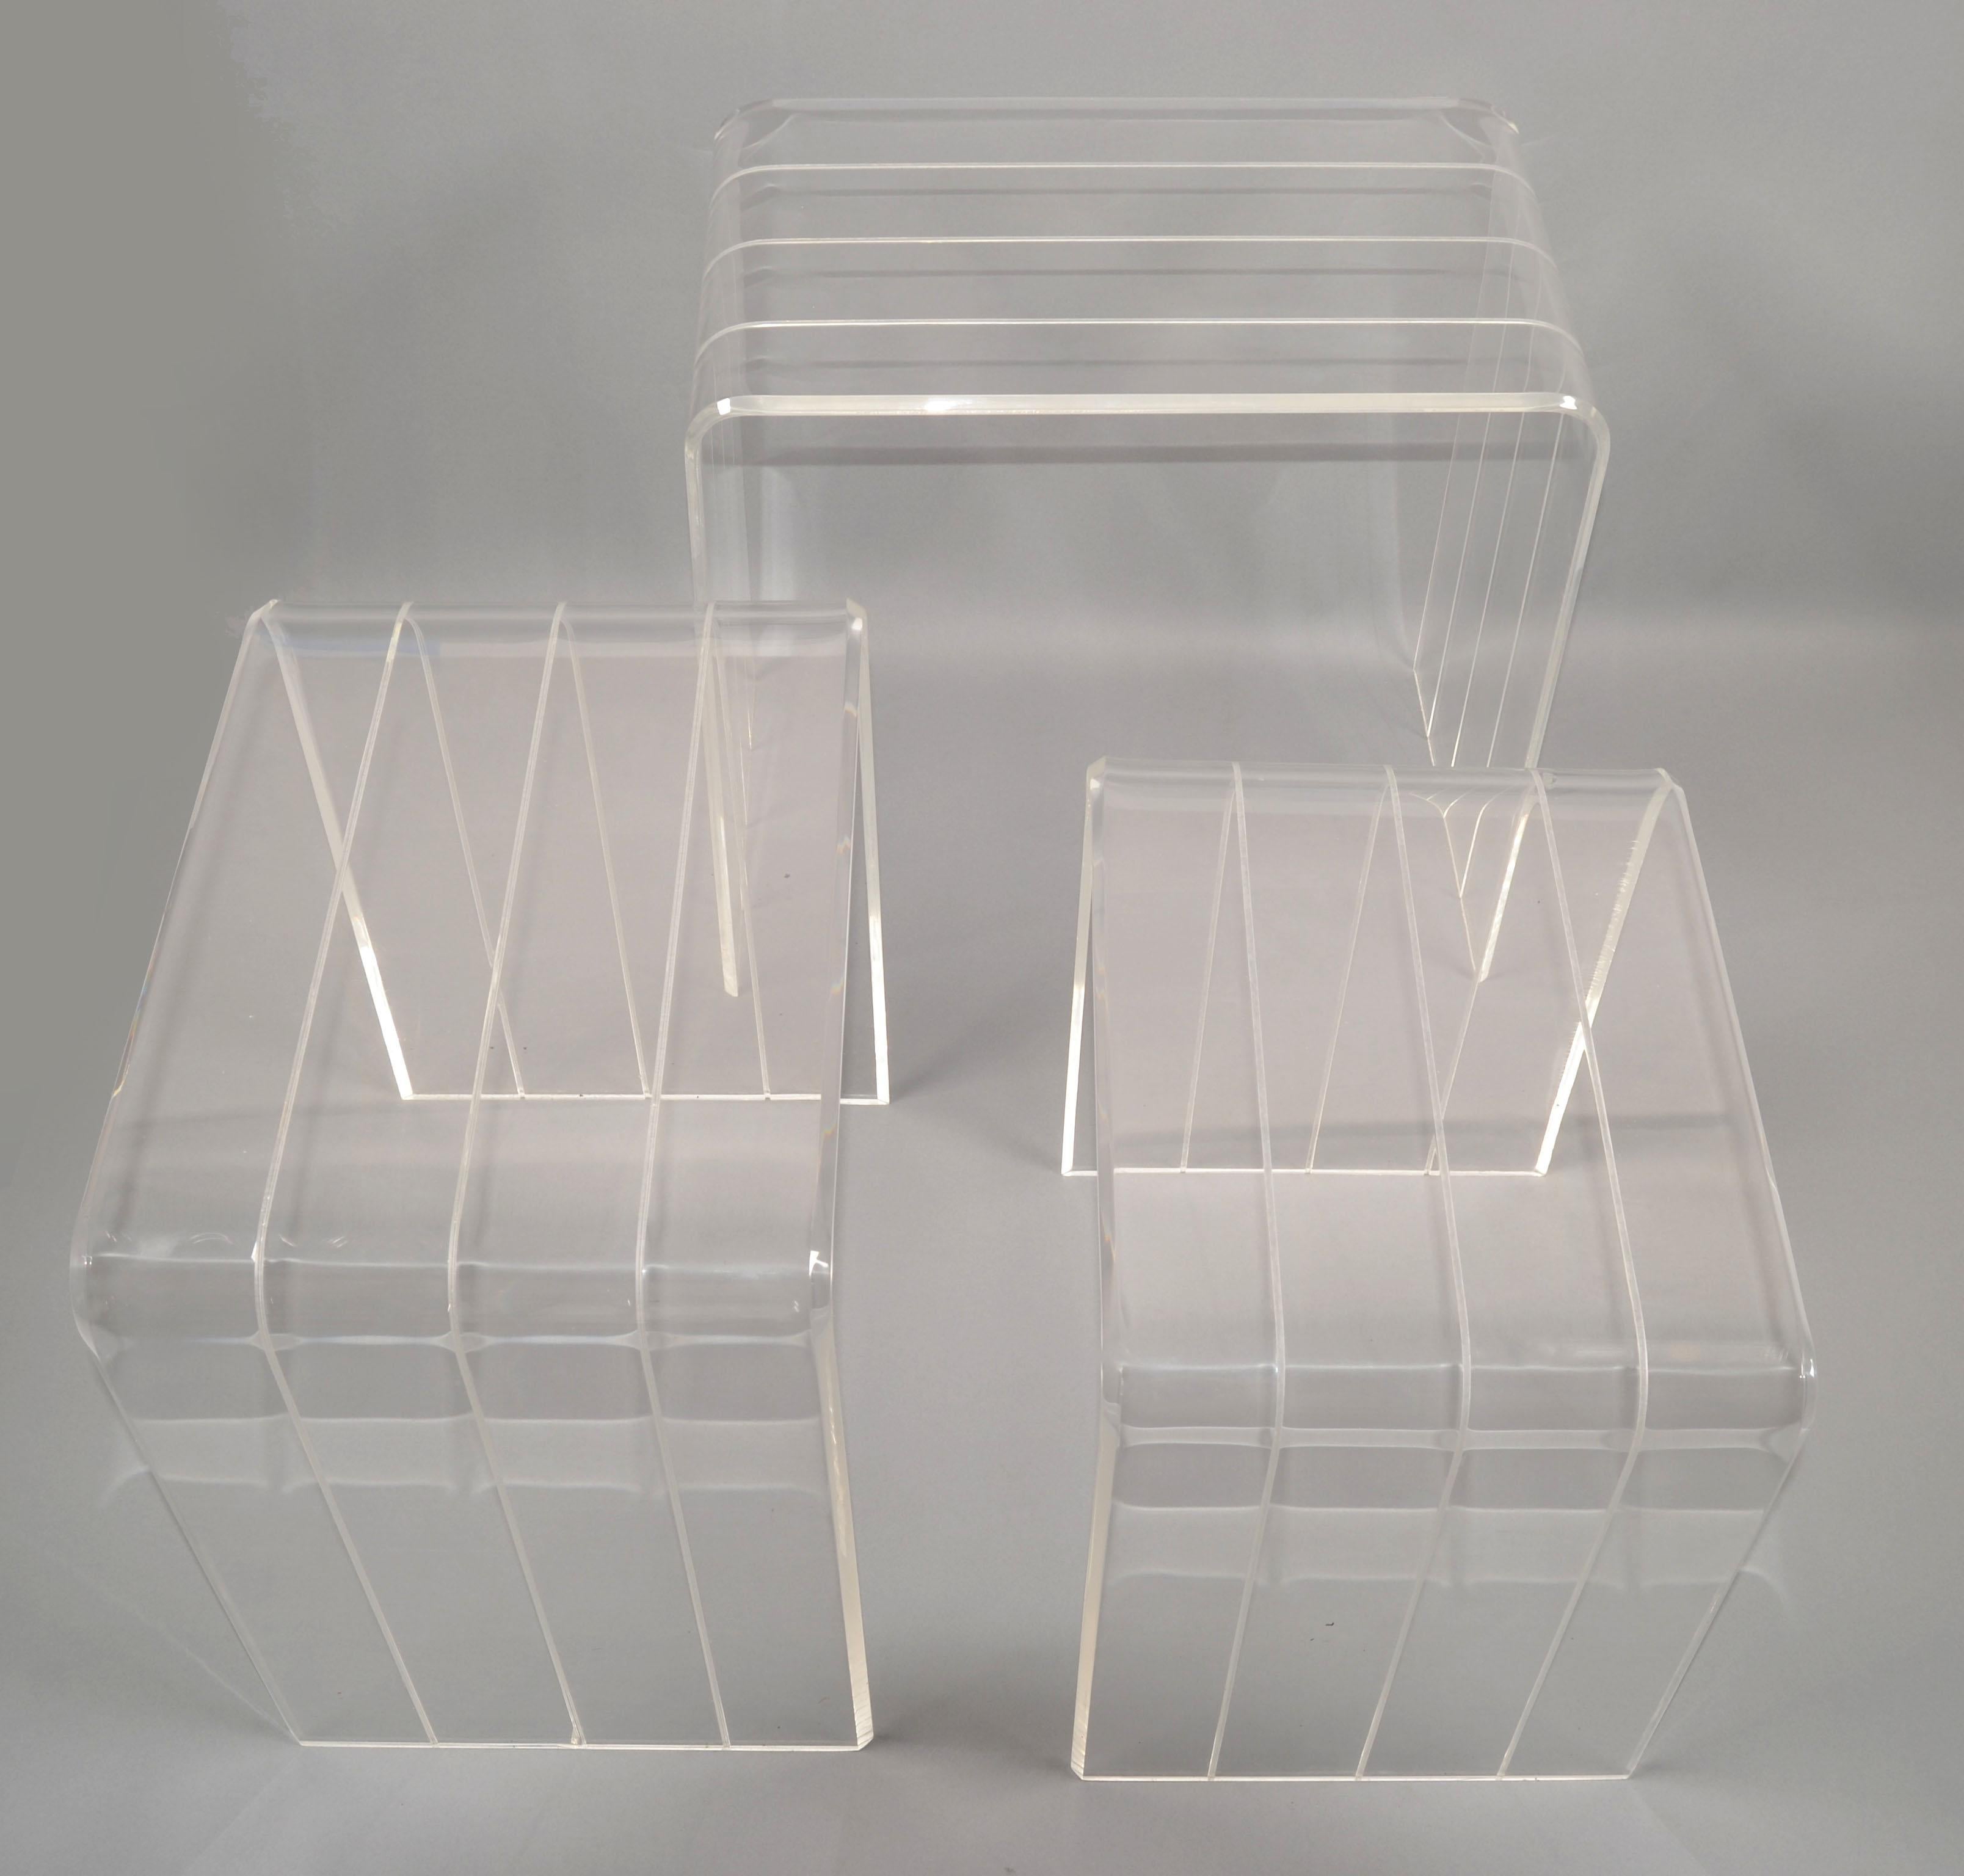 Set 3 Italian Etched Lucite Waterfall Nesting Tables Stacking Tables Stools 1970 For Sale 6